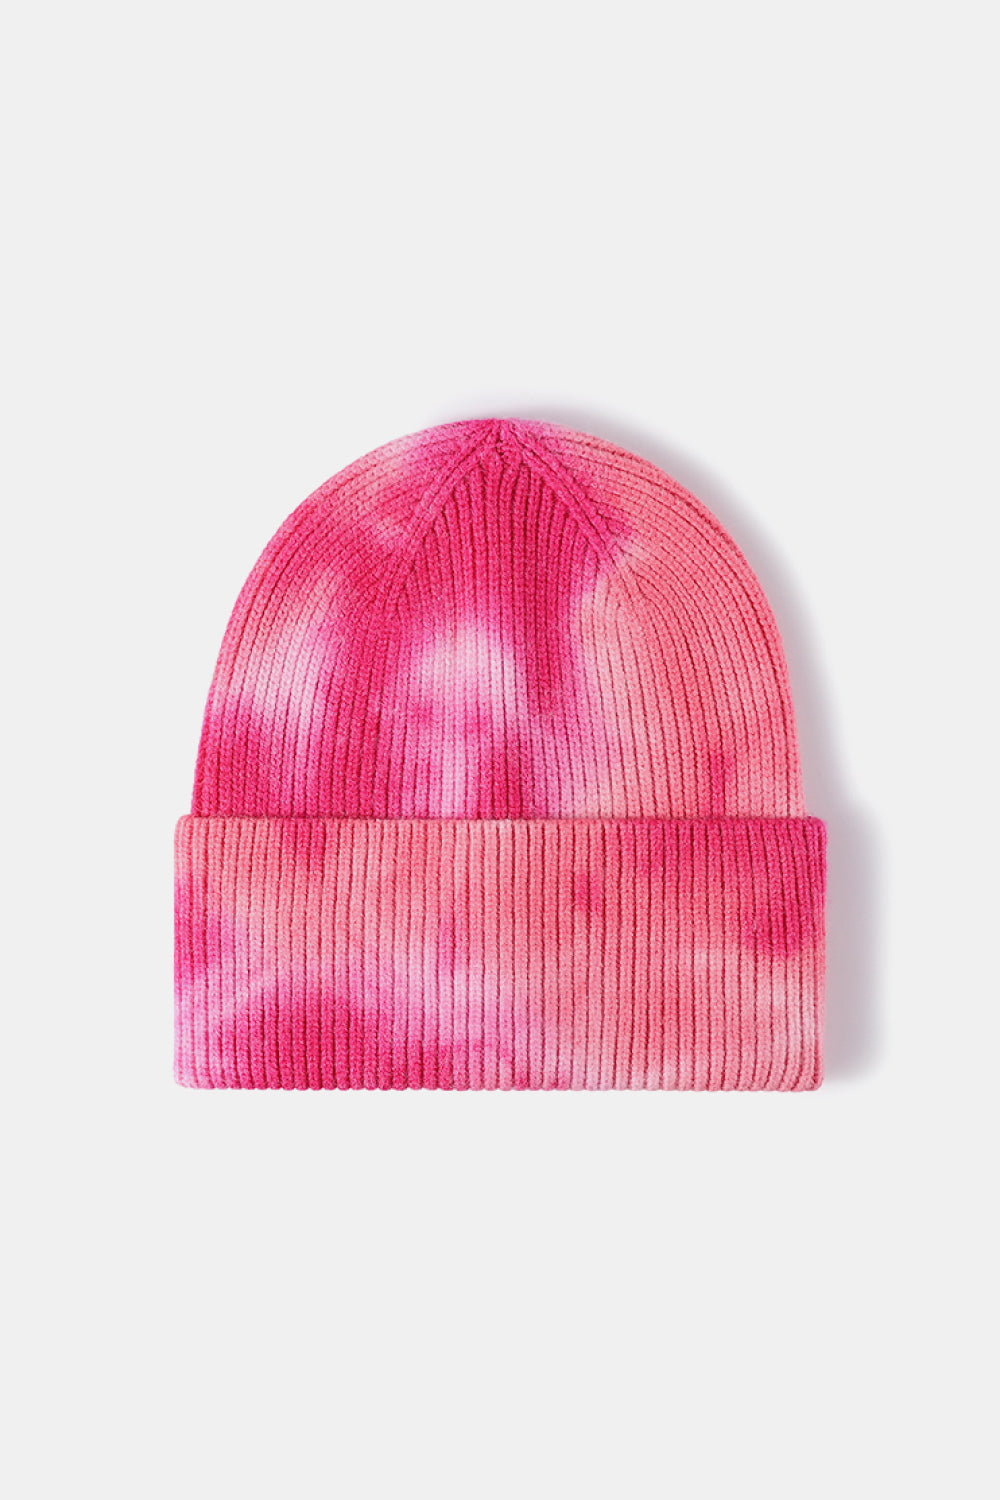 Pale Violet Red Tie-Dye Cuffed Rib-Knit Beanie Hat Sentient Beauty Fashions *Accessories